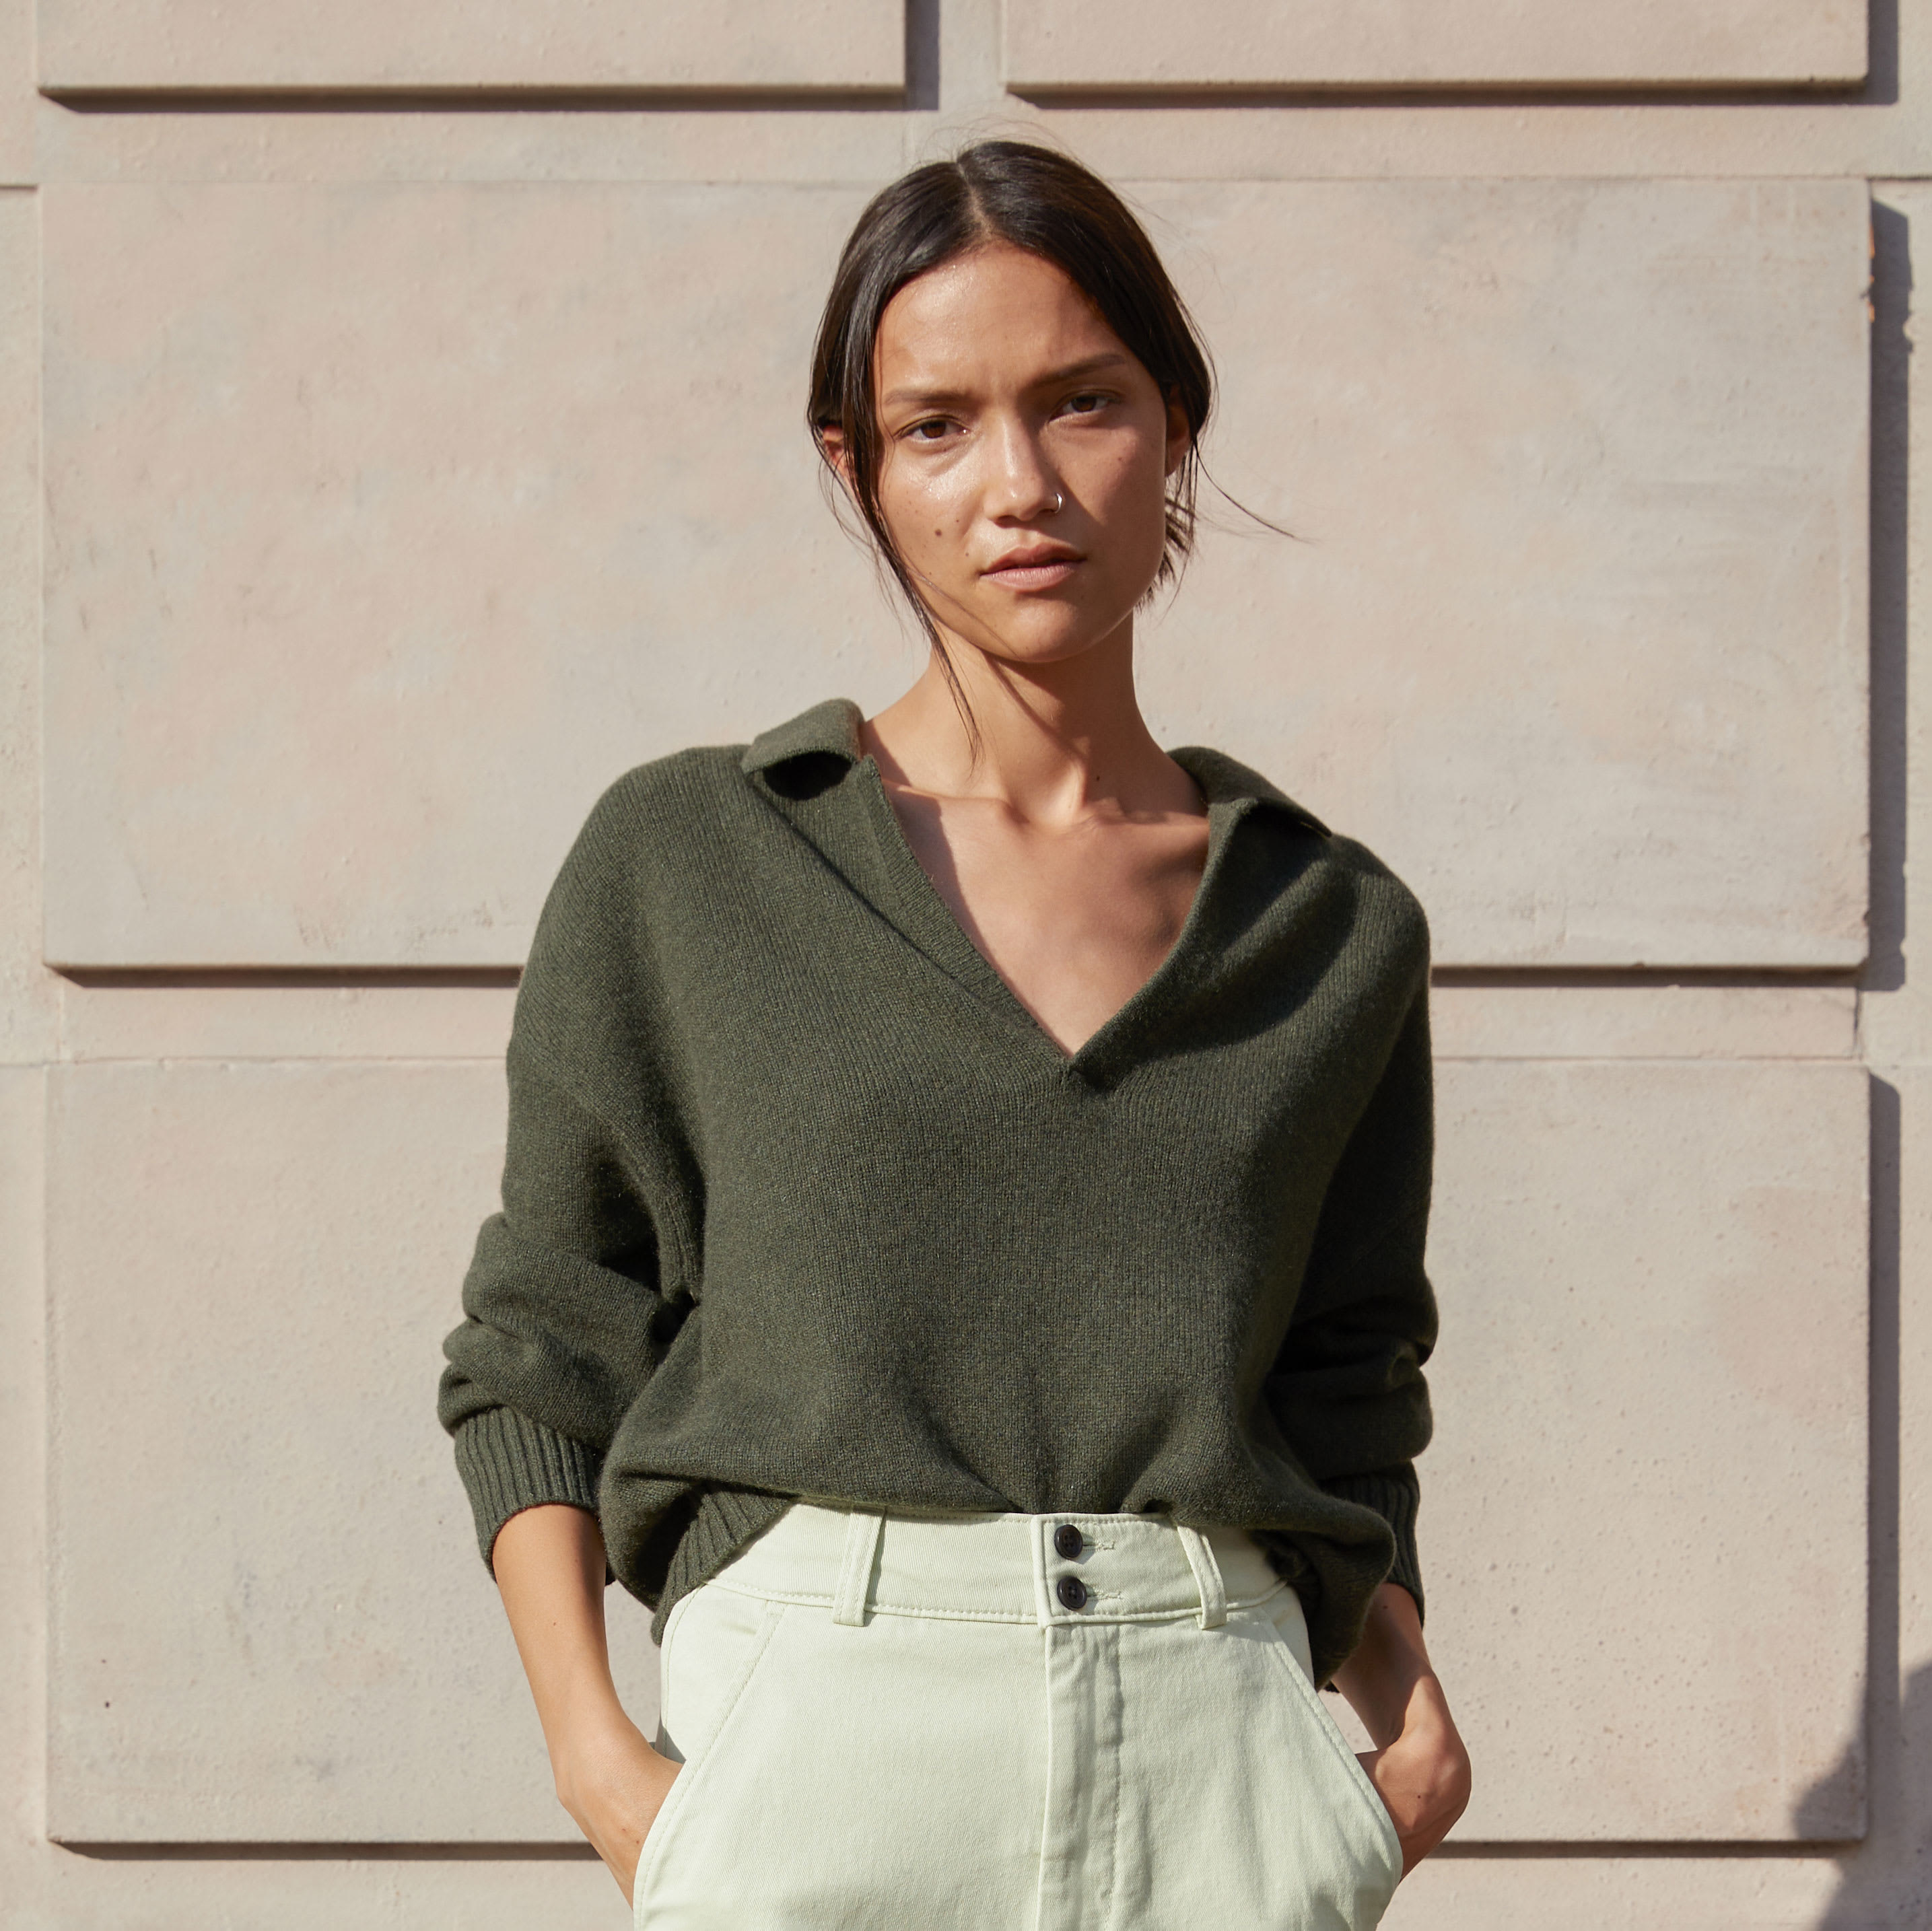 A model in the dark olive green sweater